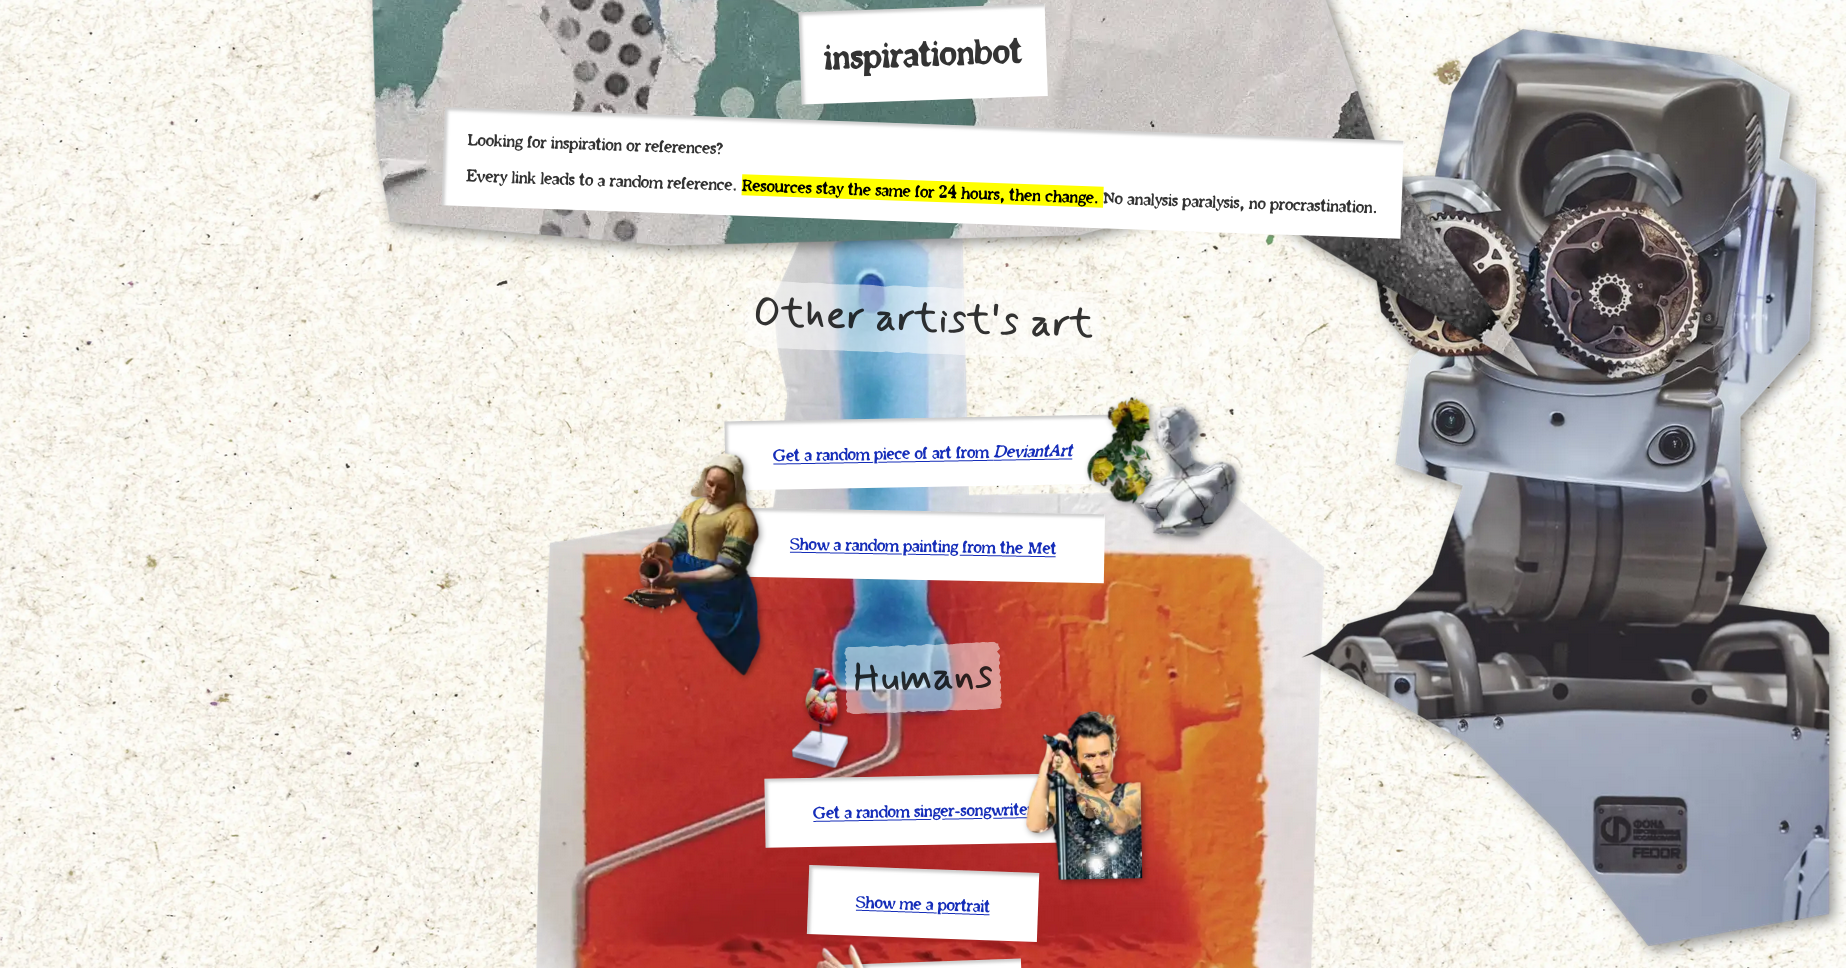 Screenshot of inspirationbot with links to different random art ressources